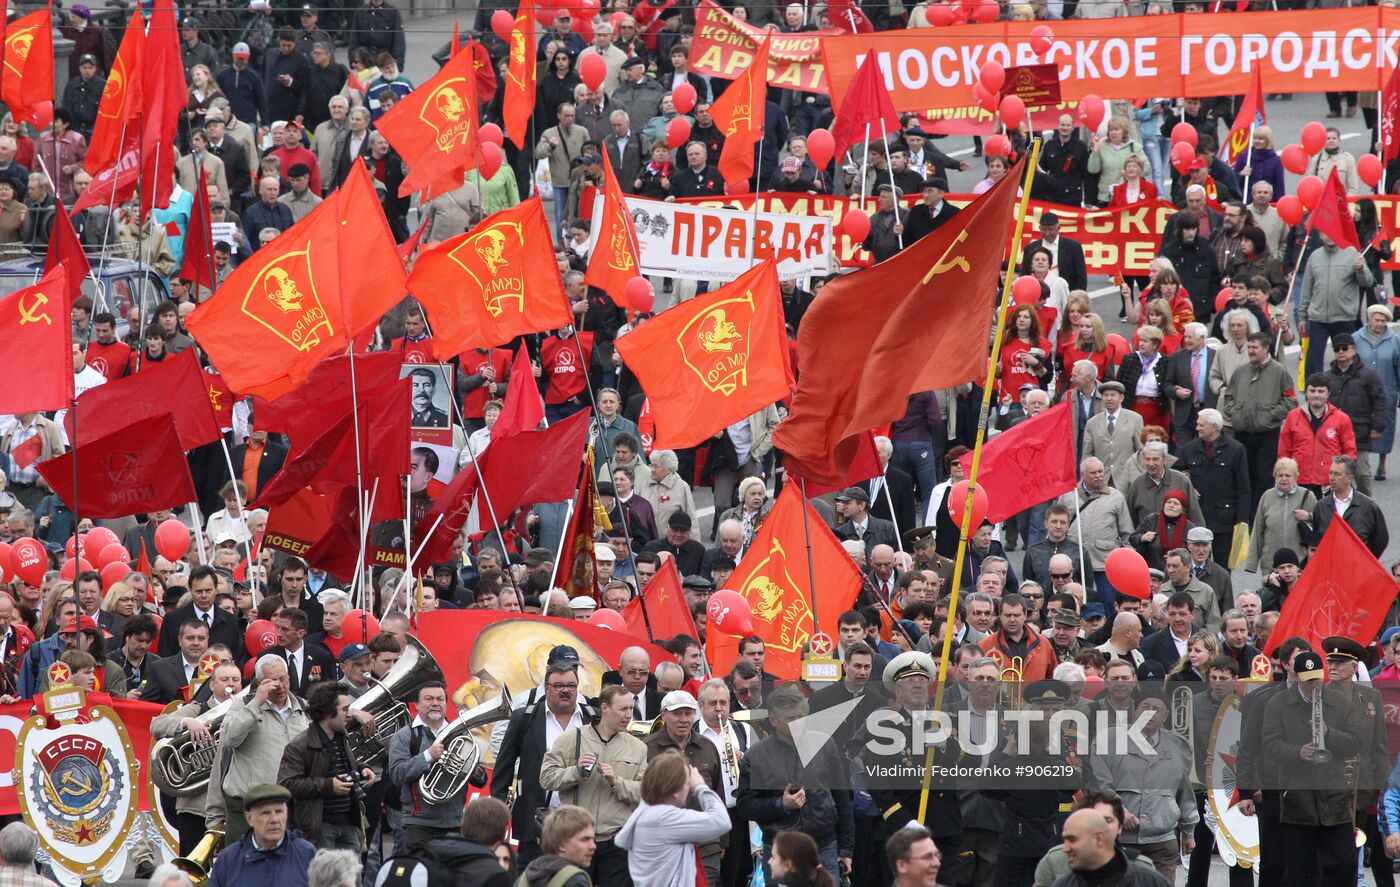 Communists' march in Moscow